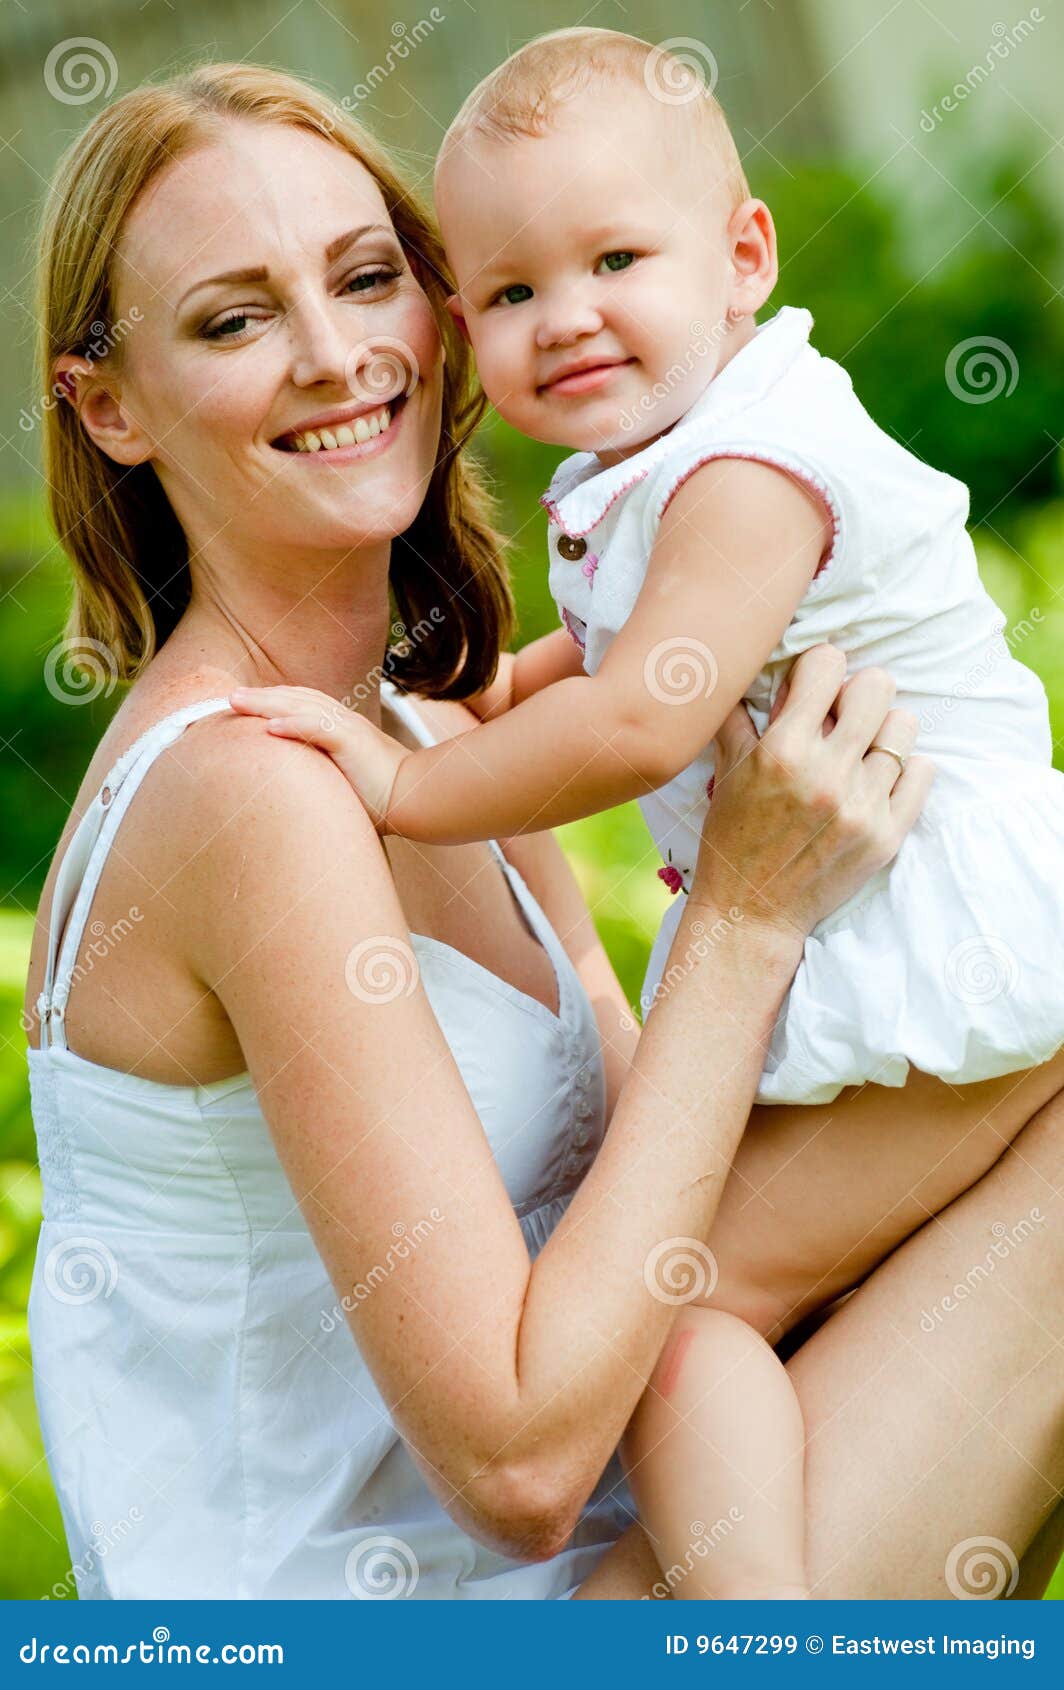 Download Woman And Child stock image. Image of beauty, carrying ...